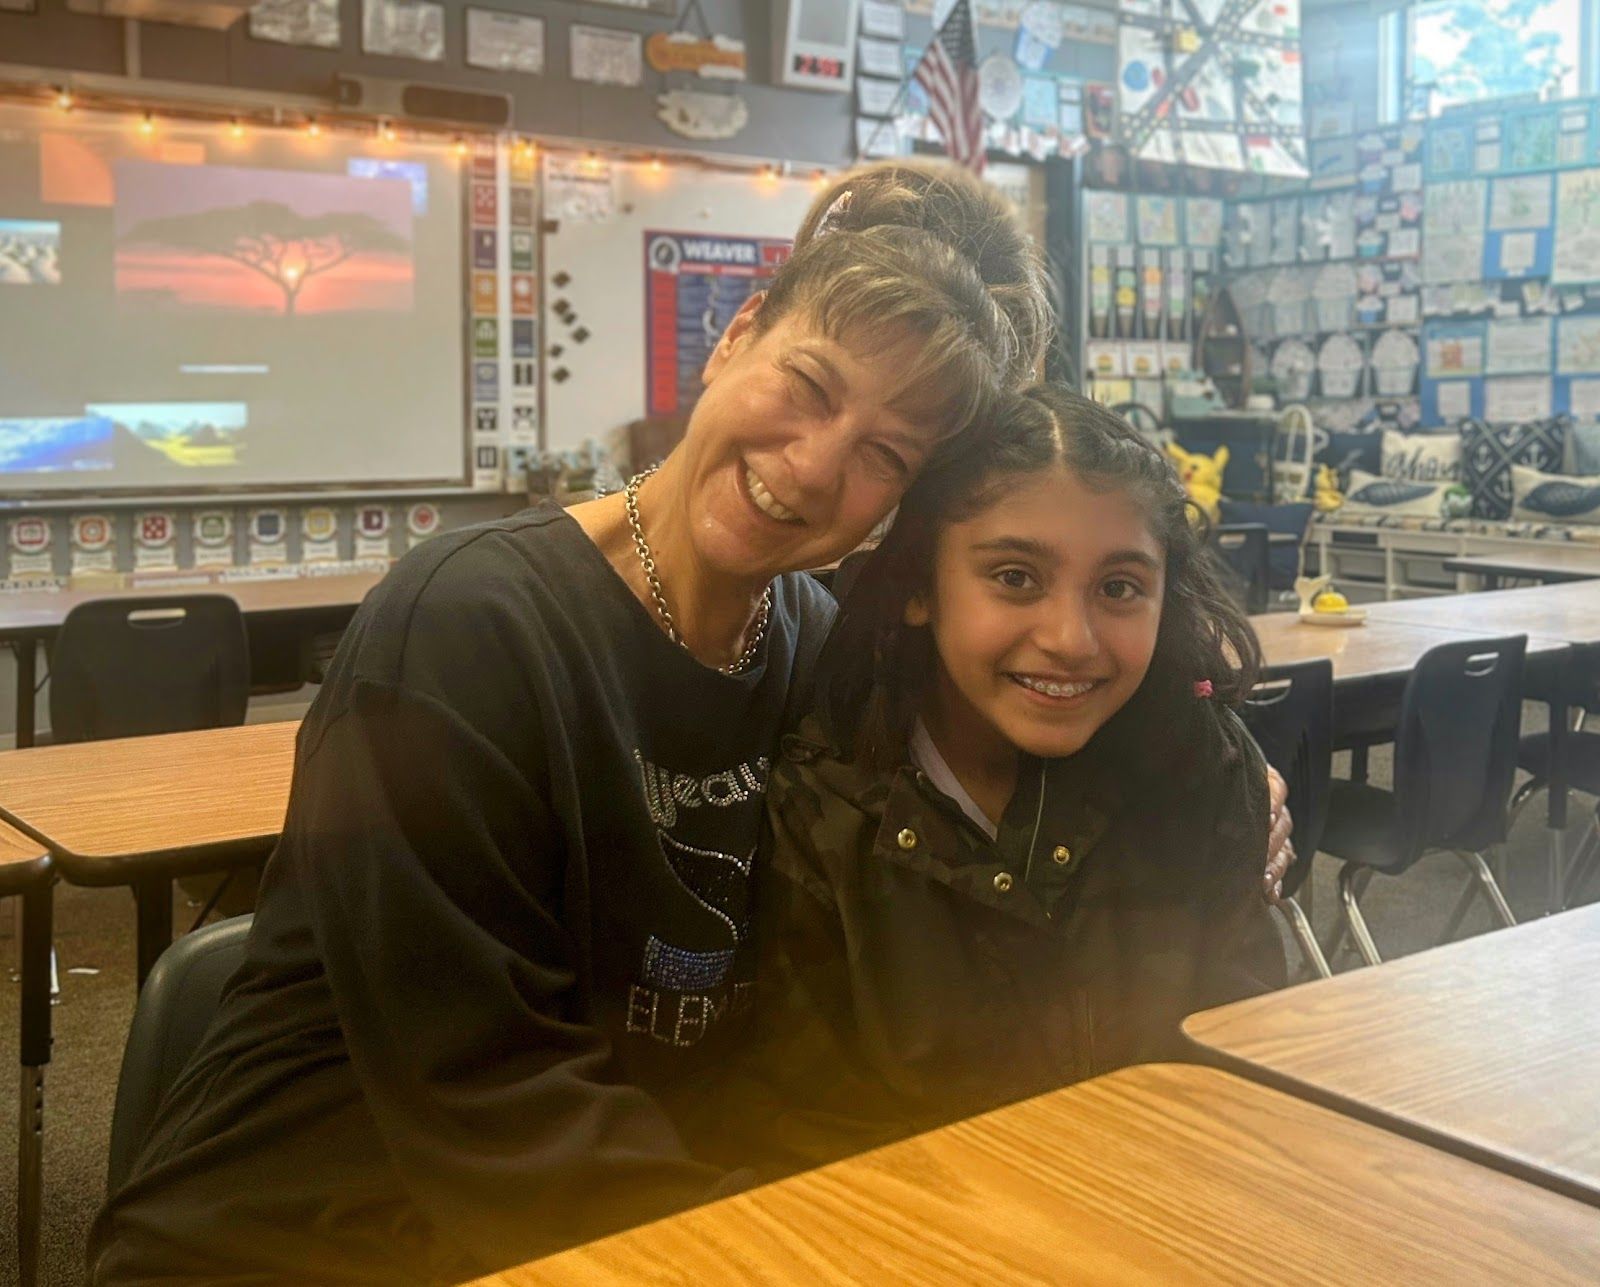 Kimi Vadher, founder of Weaver Elementary school's first student publication “Whale Tales,” with teacher Ruth Freedman-Finch, the adviser for the newsletter. Photo by Bella Kim.